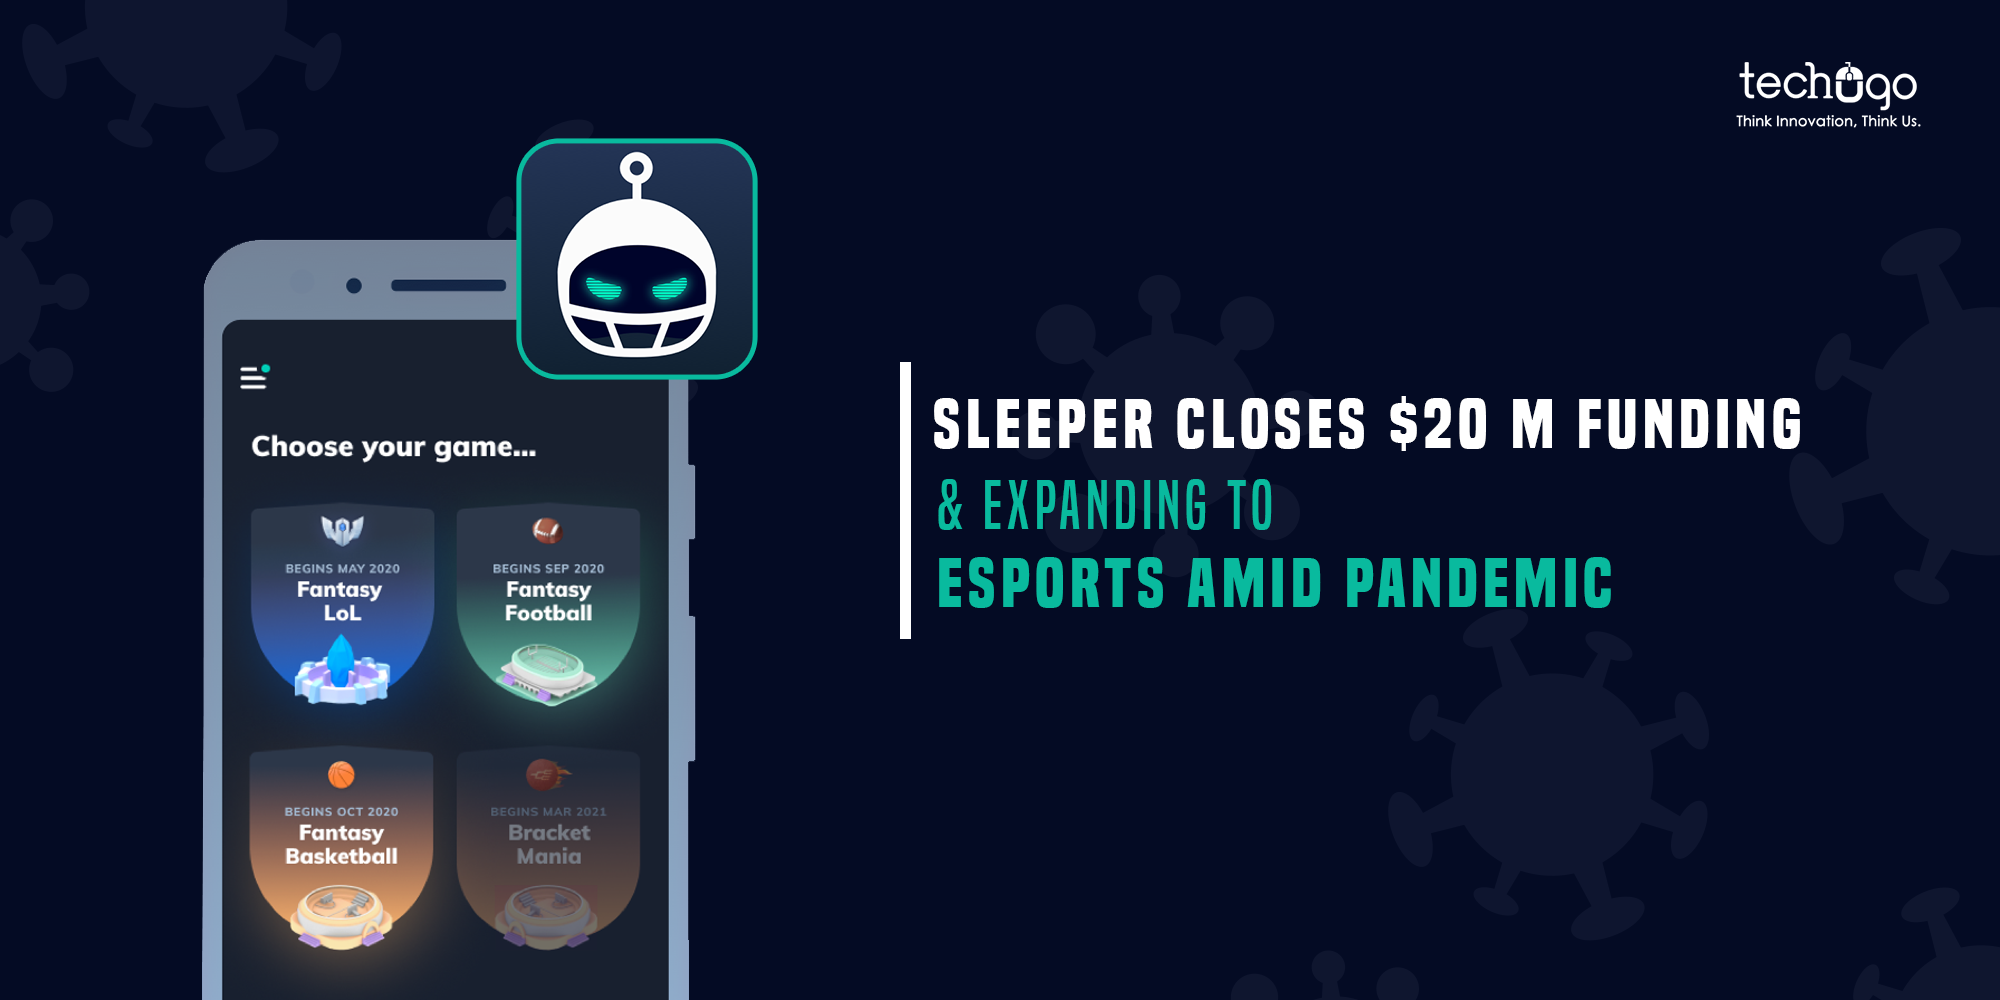 Sleeper Closes $20 M Funding And Expanding To Esports Amid Pandemic